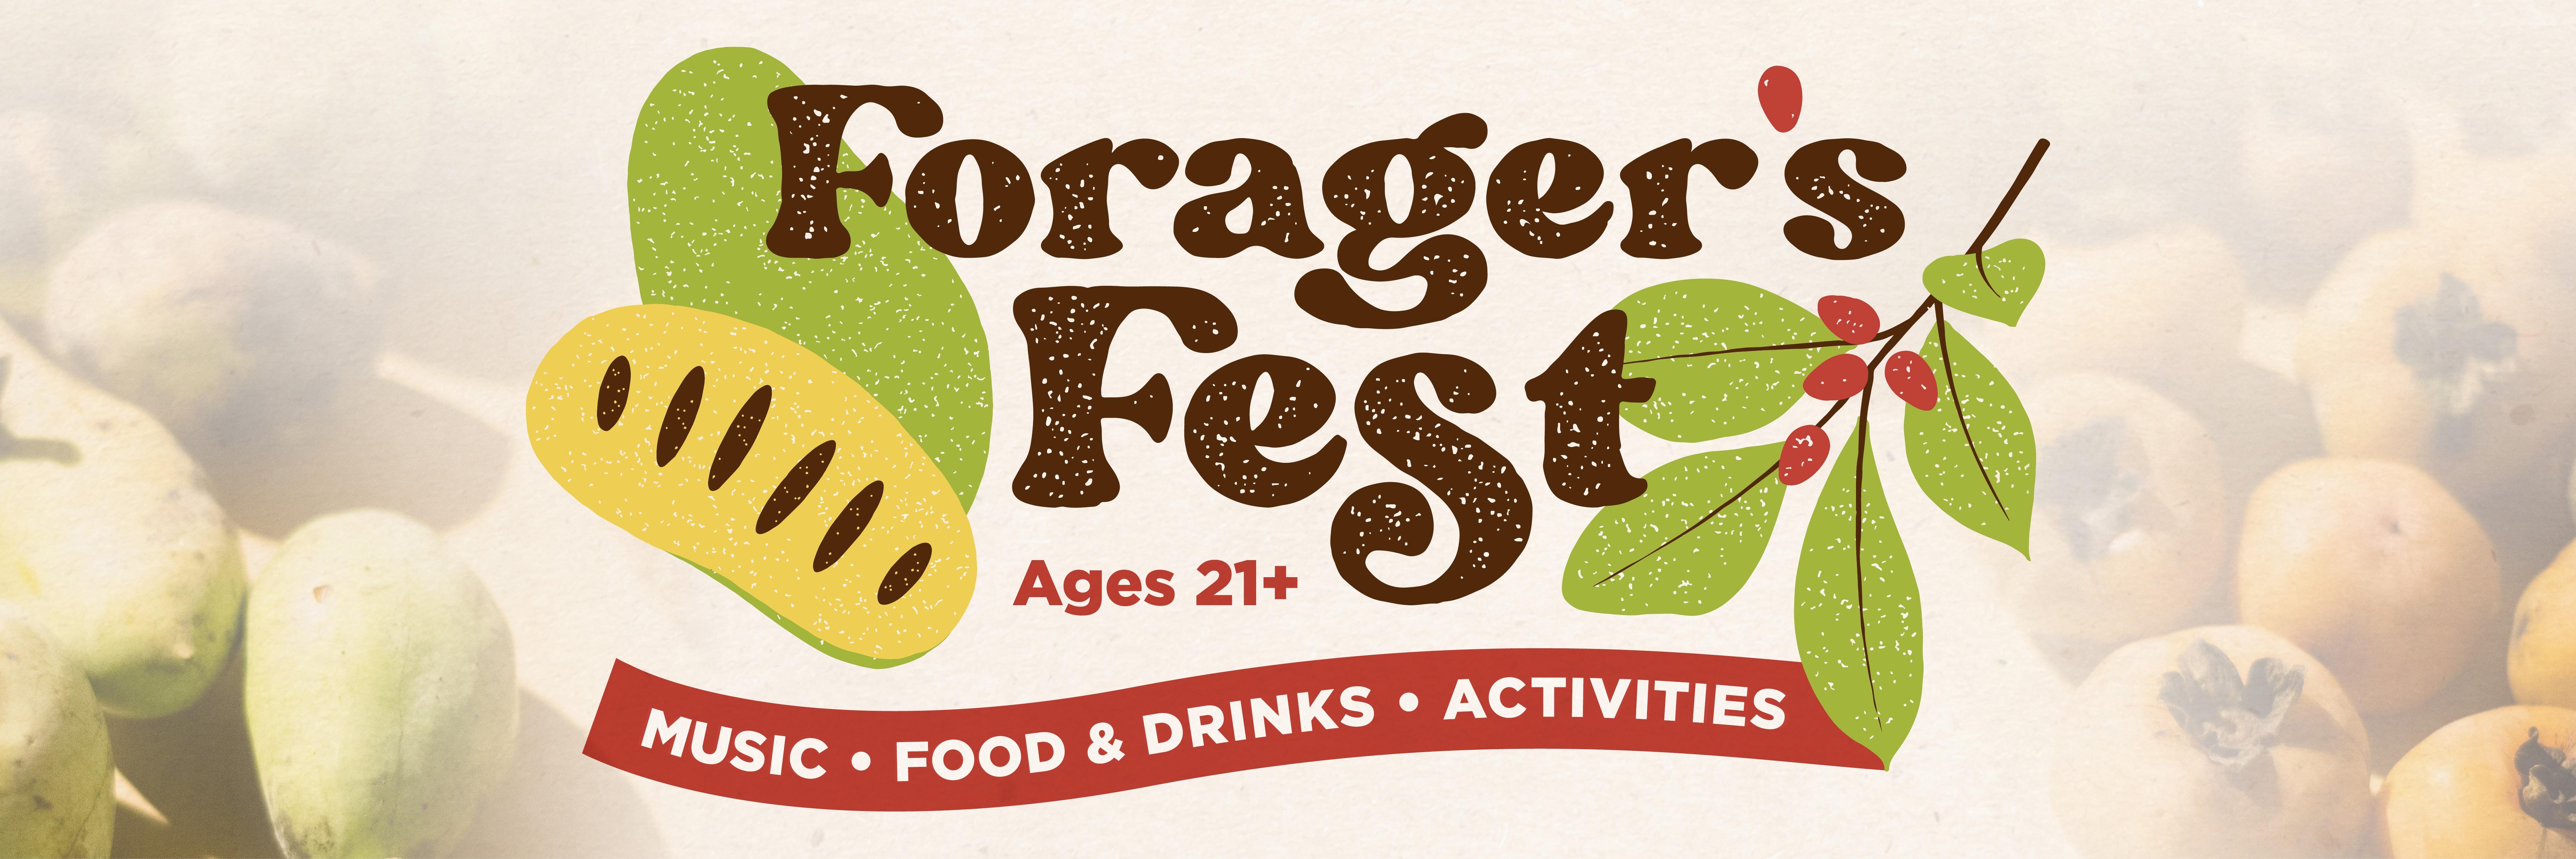 Forager's Fest, ages 21+